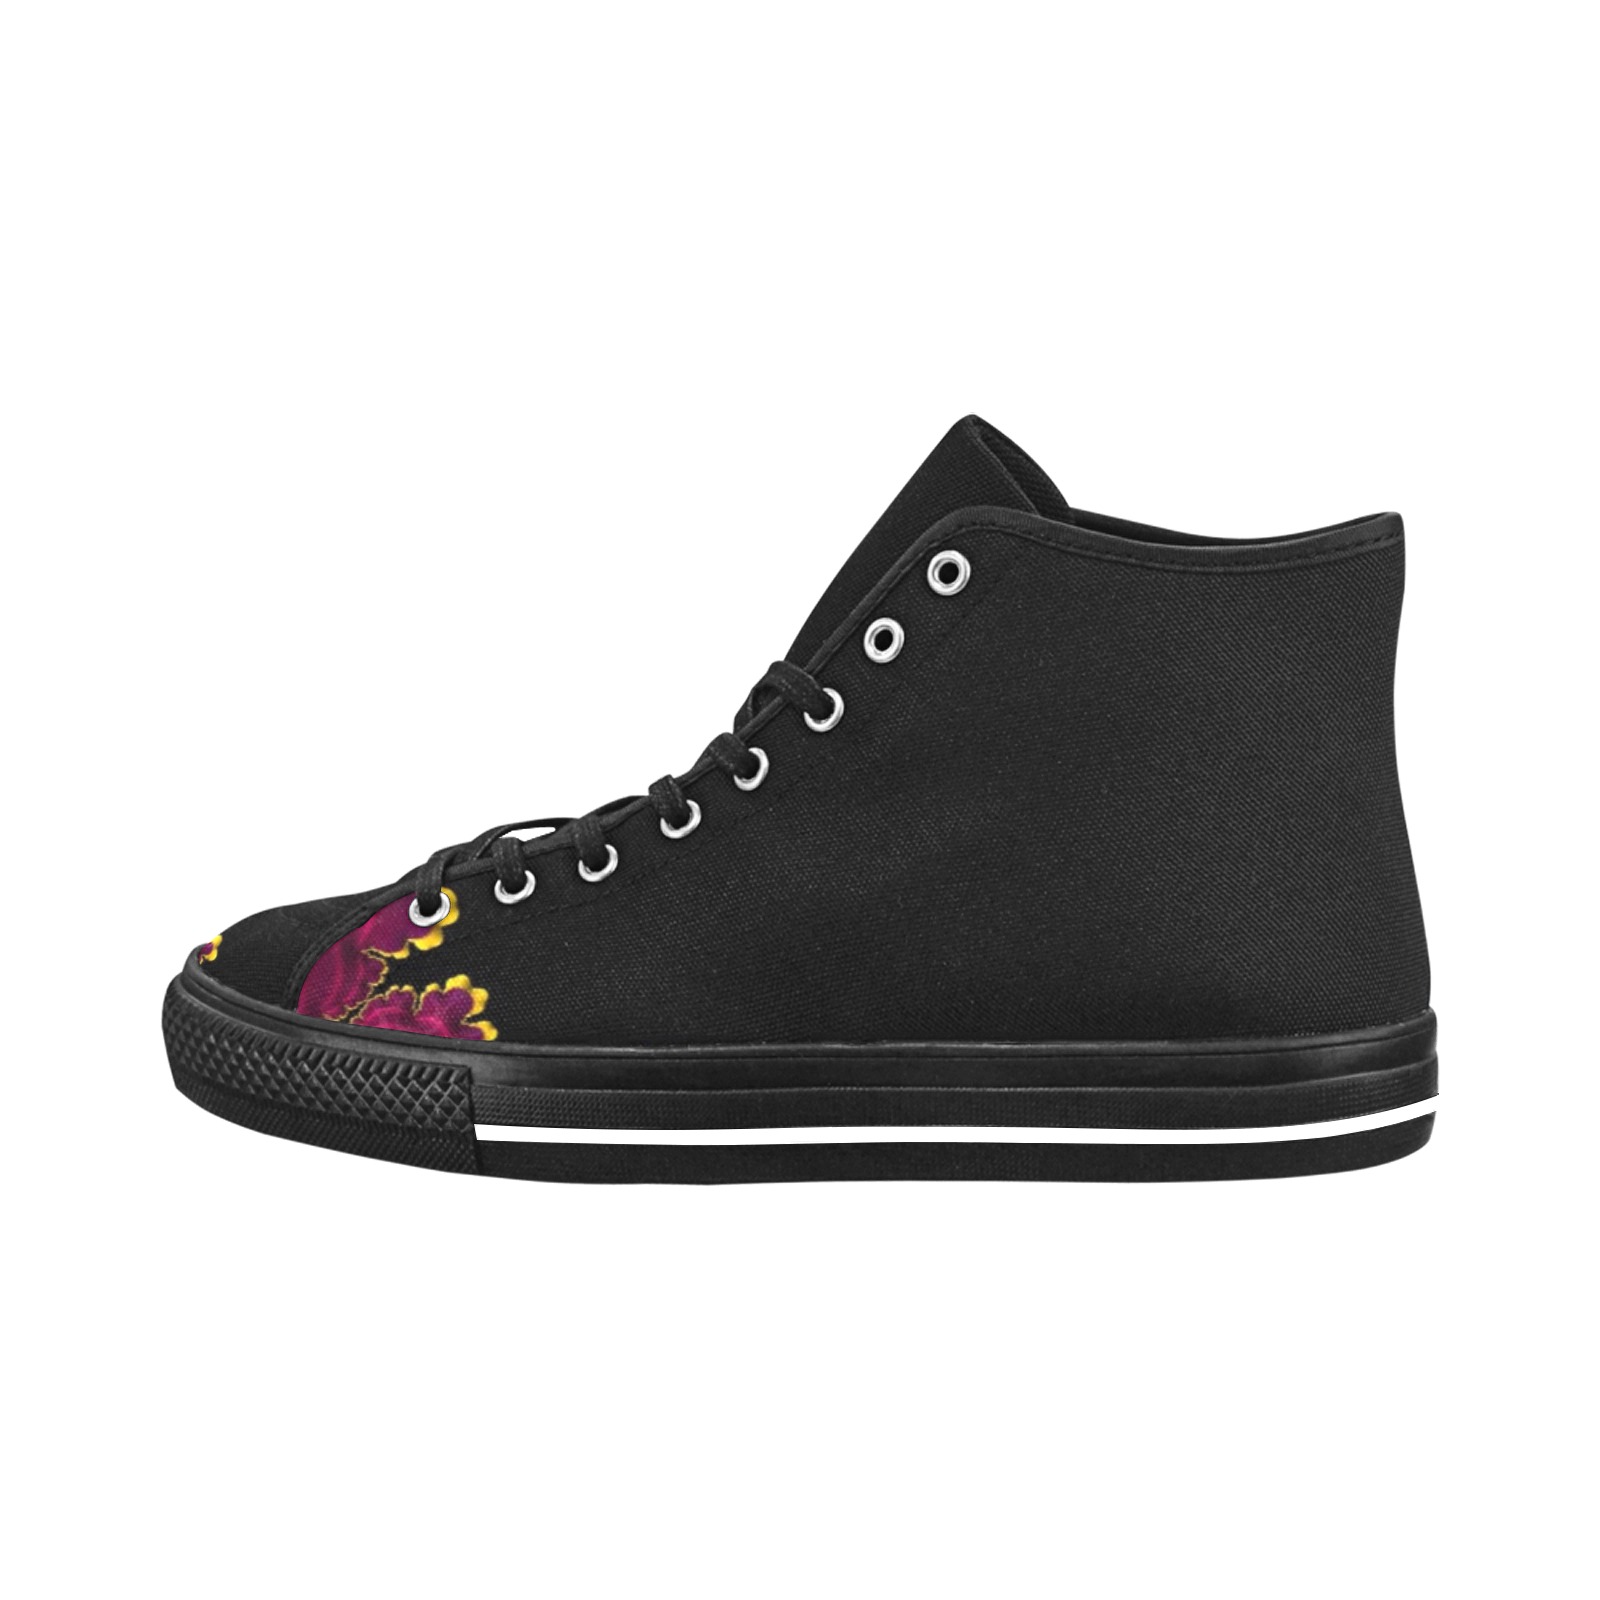 Purple Mauve and Yellow Fringe on Black Fractal Abstract Vancouver H Men's Canvas Shoes (1013-1)